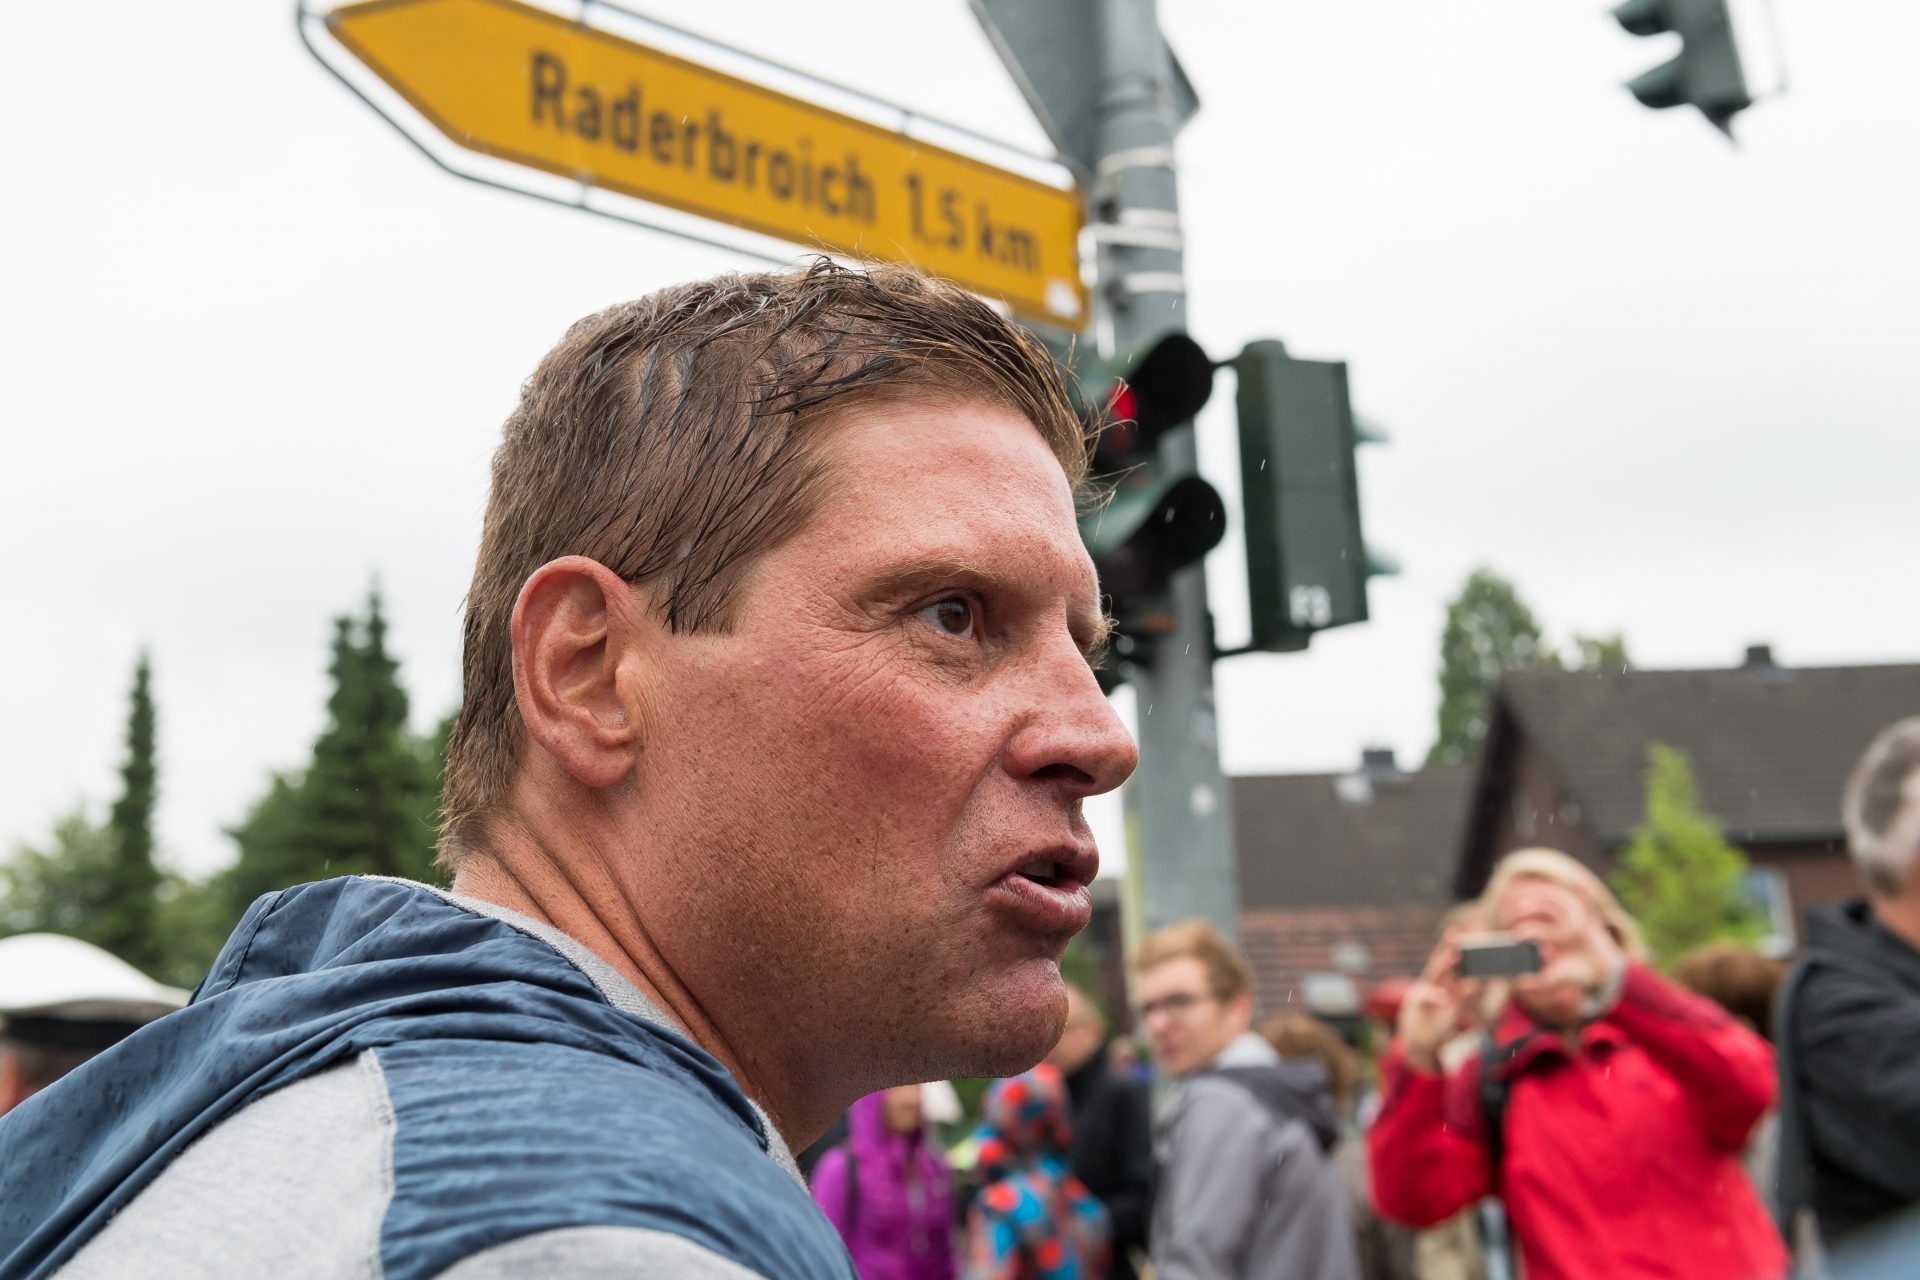 The terrible confessions of Jan Ullrich, winner of the 1997 Tour de France